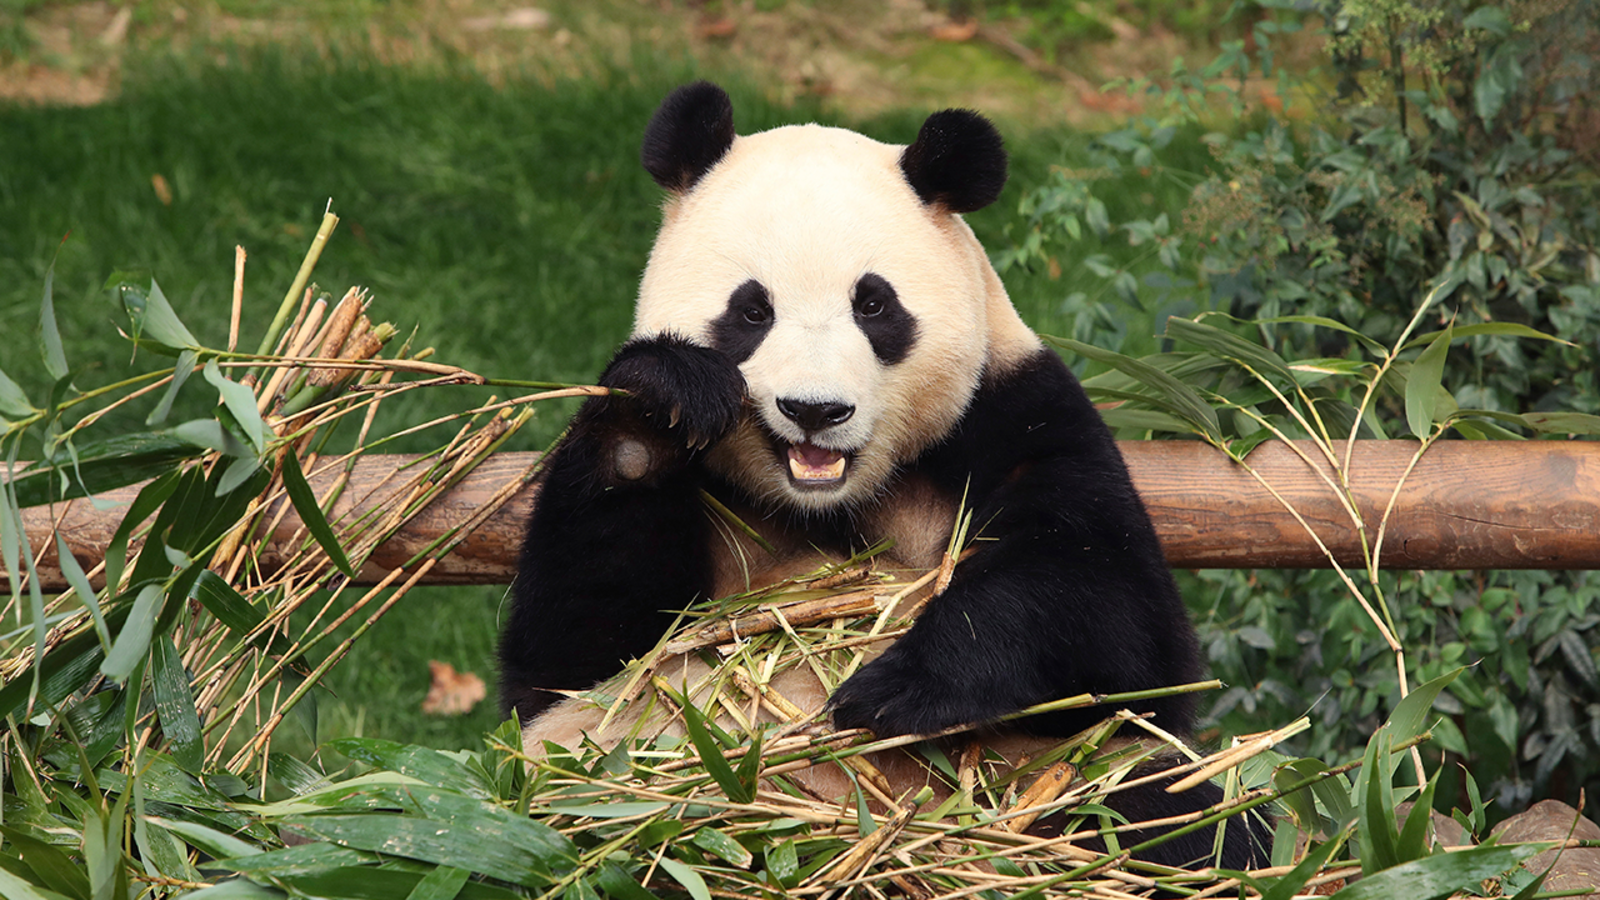 Mayor London Breed’s plans to bring pandas to San Francisco Zoo from China hits roadblock with board of supervisors [Video]